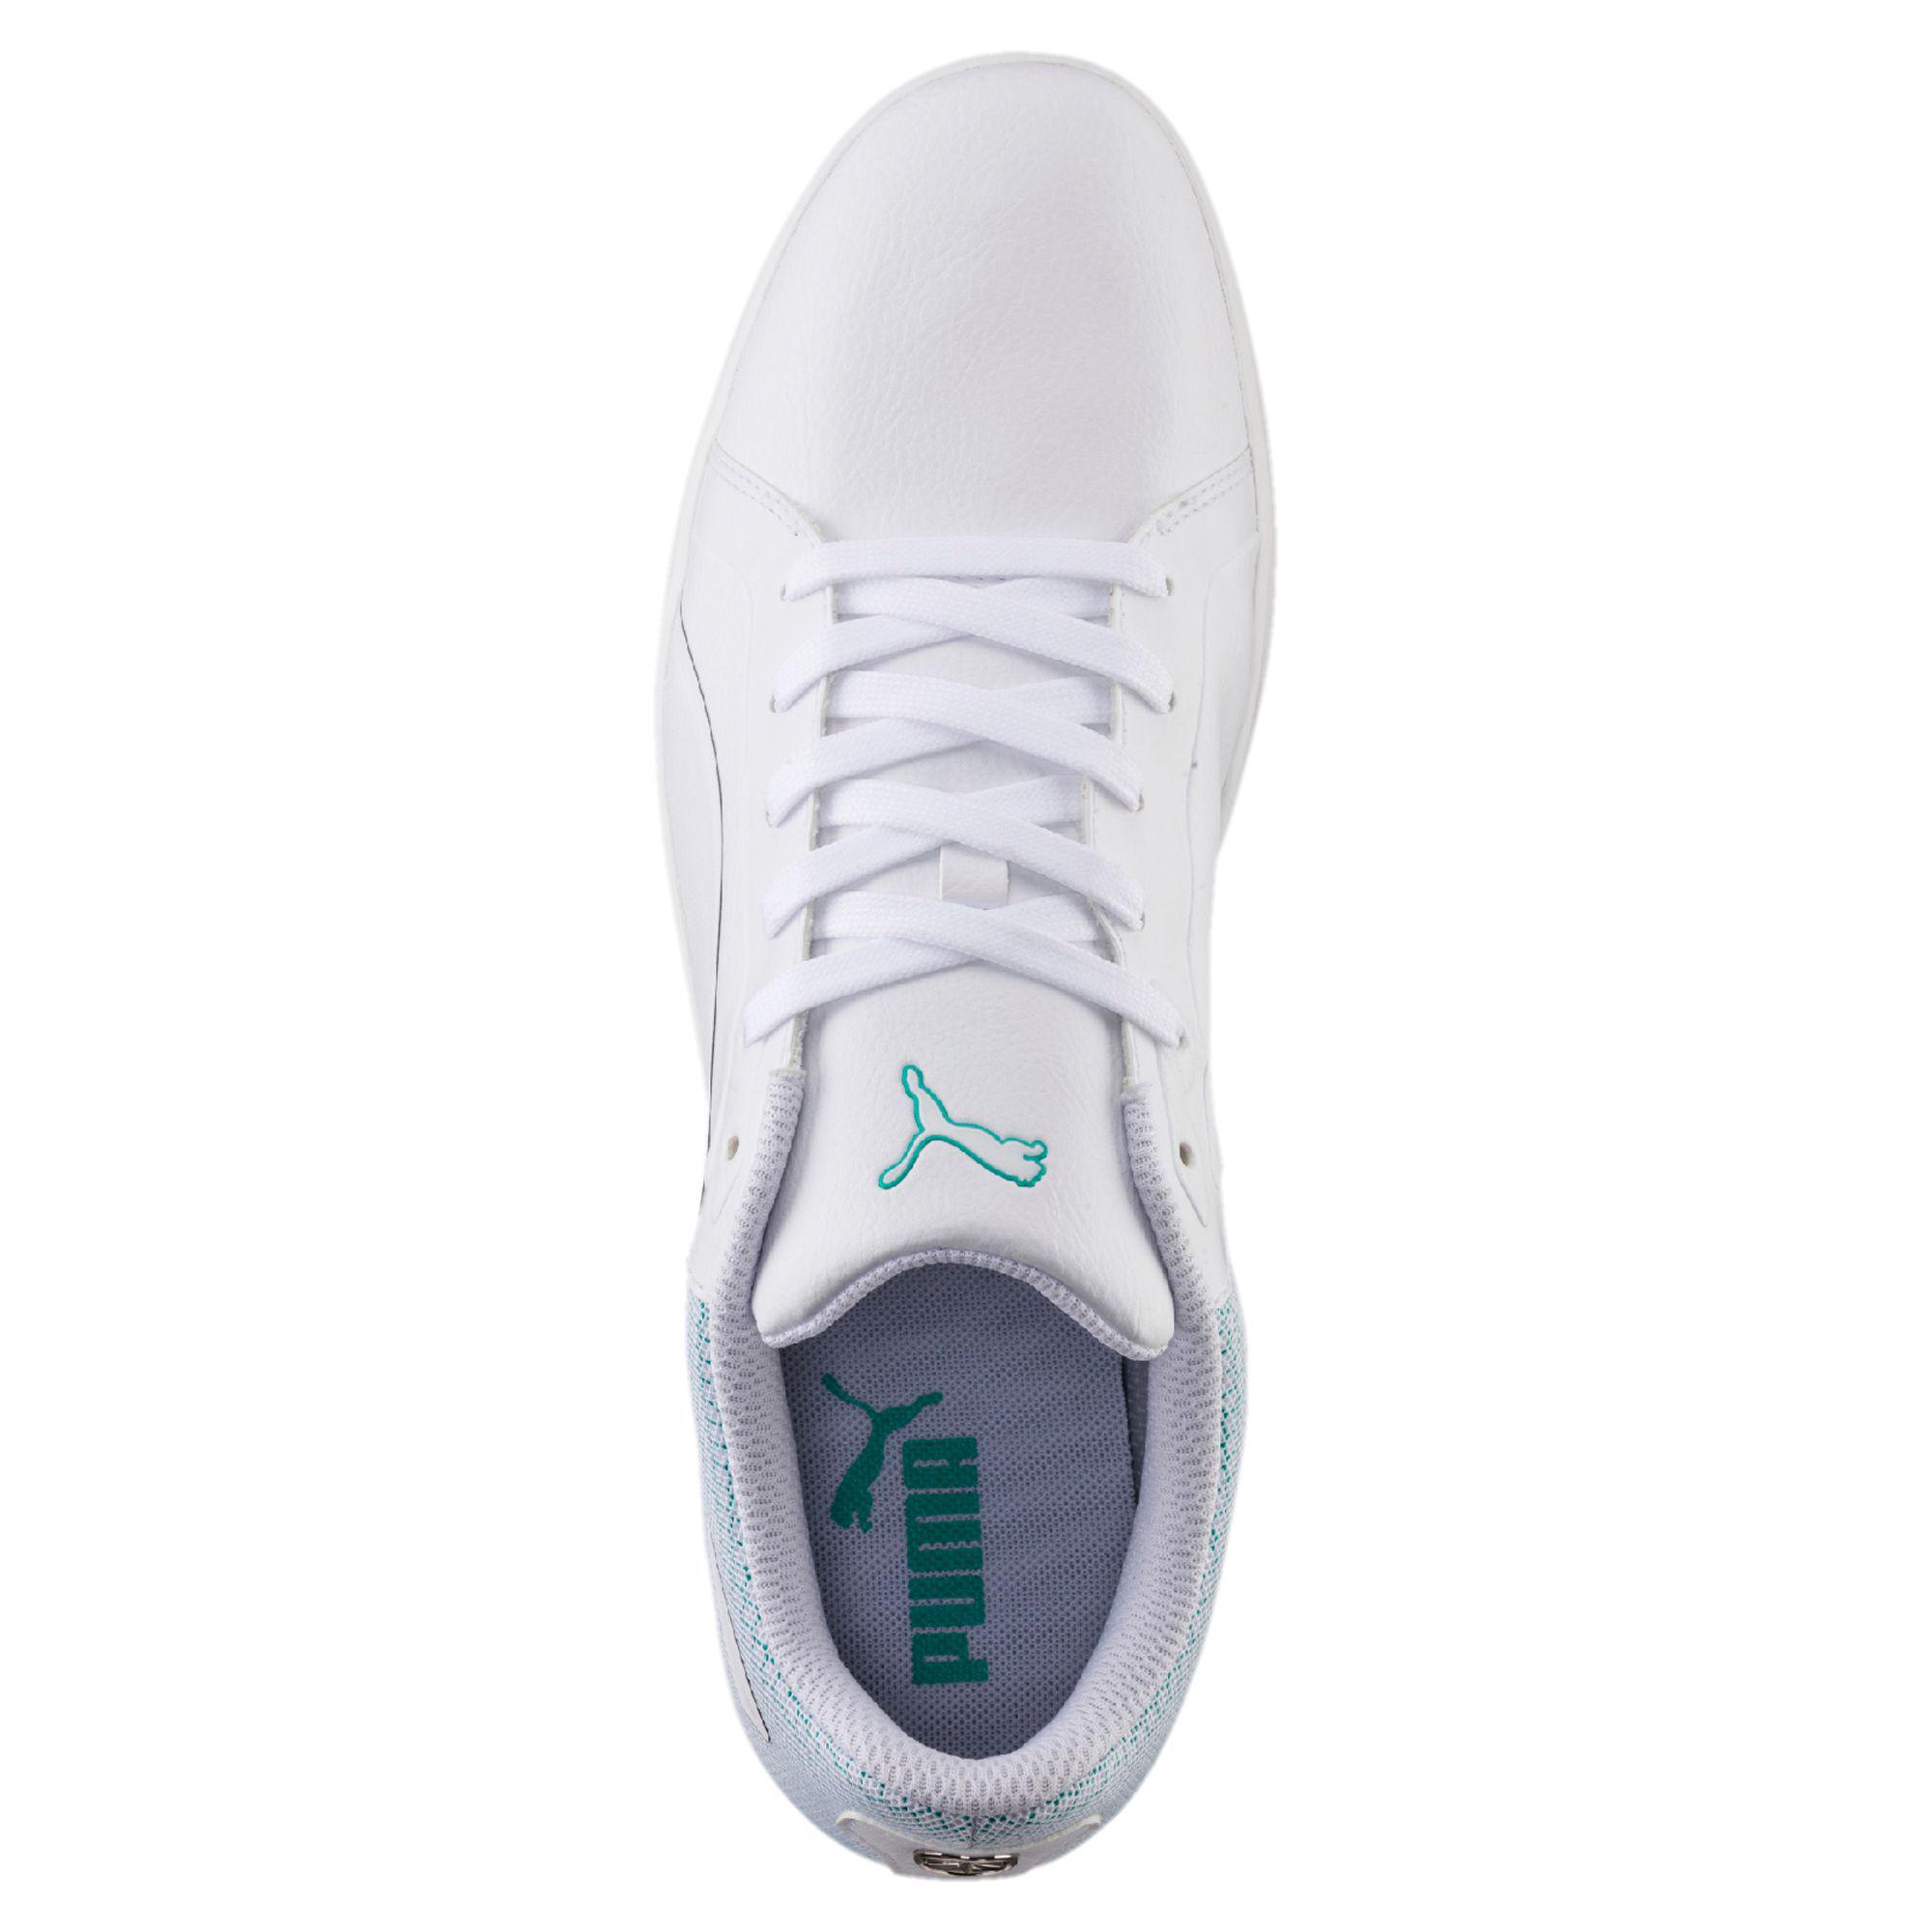 PUMA Synthetic Mamgp Court Men's Shoes in White for Men - Lyst